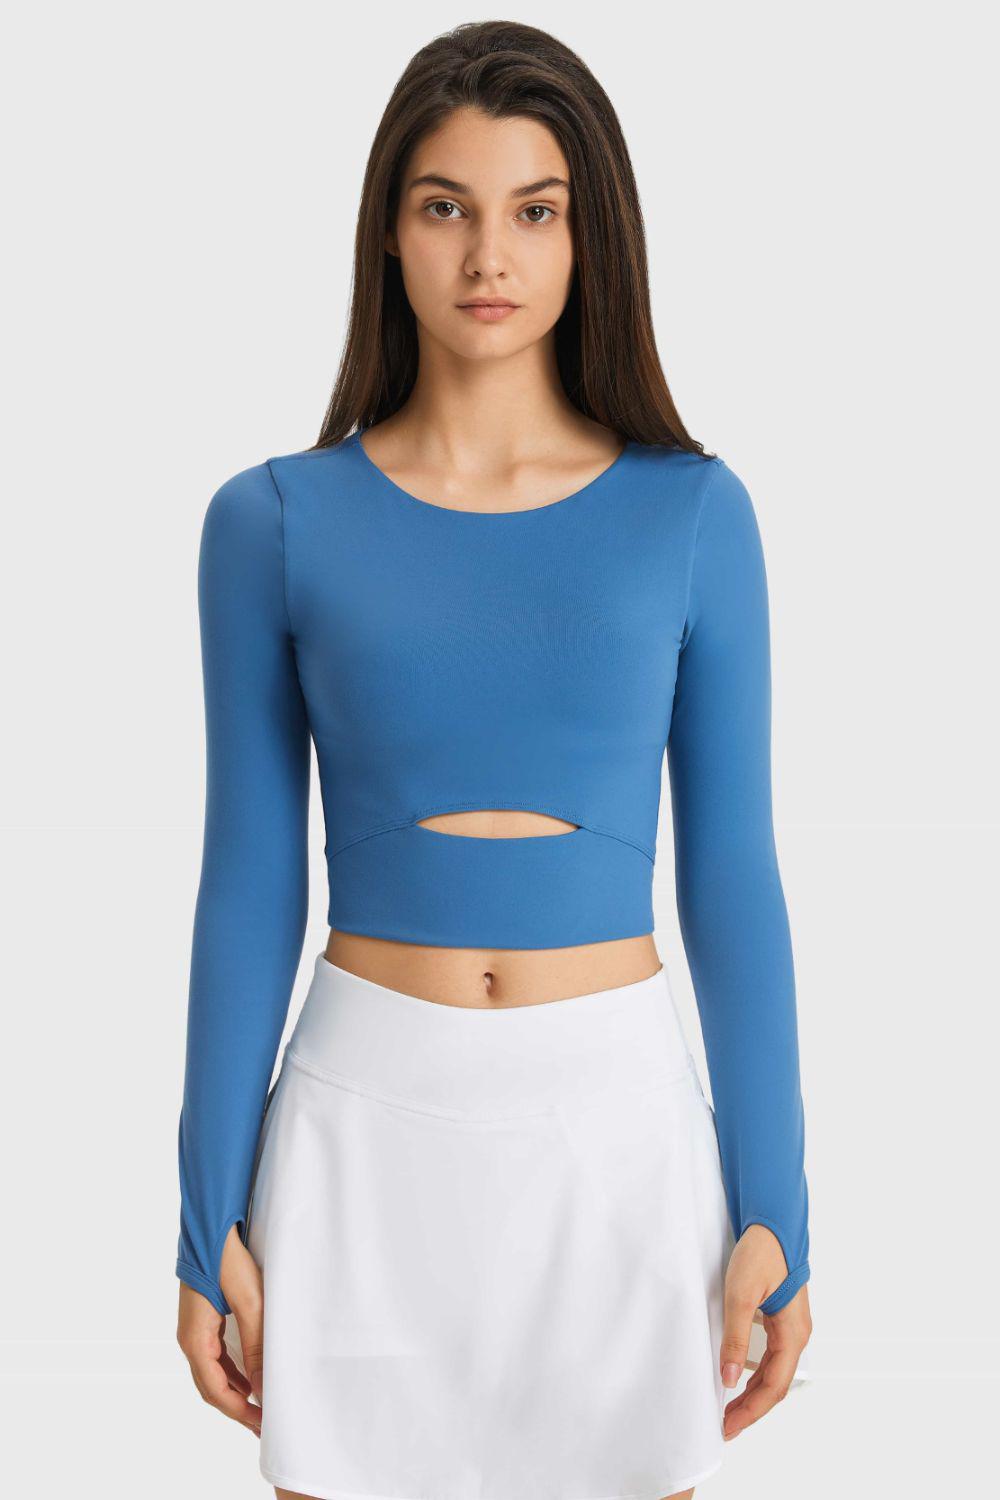 Cutout Long Sleeve Cropped Sports Top-TOPS / DRESSES-[Adult]-[Female]-Blue-4-Blue Zone Planet